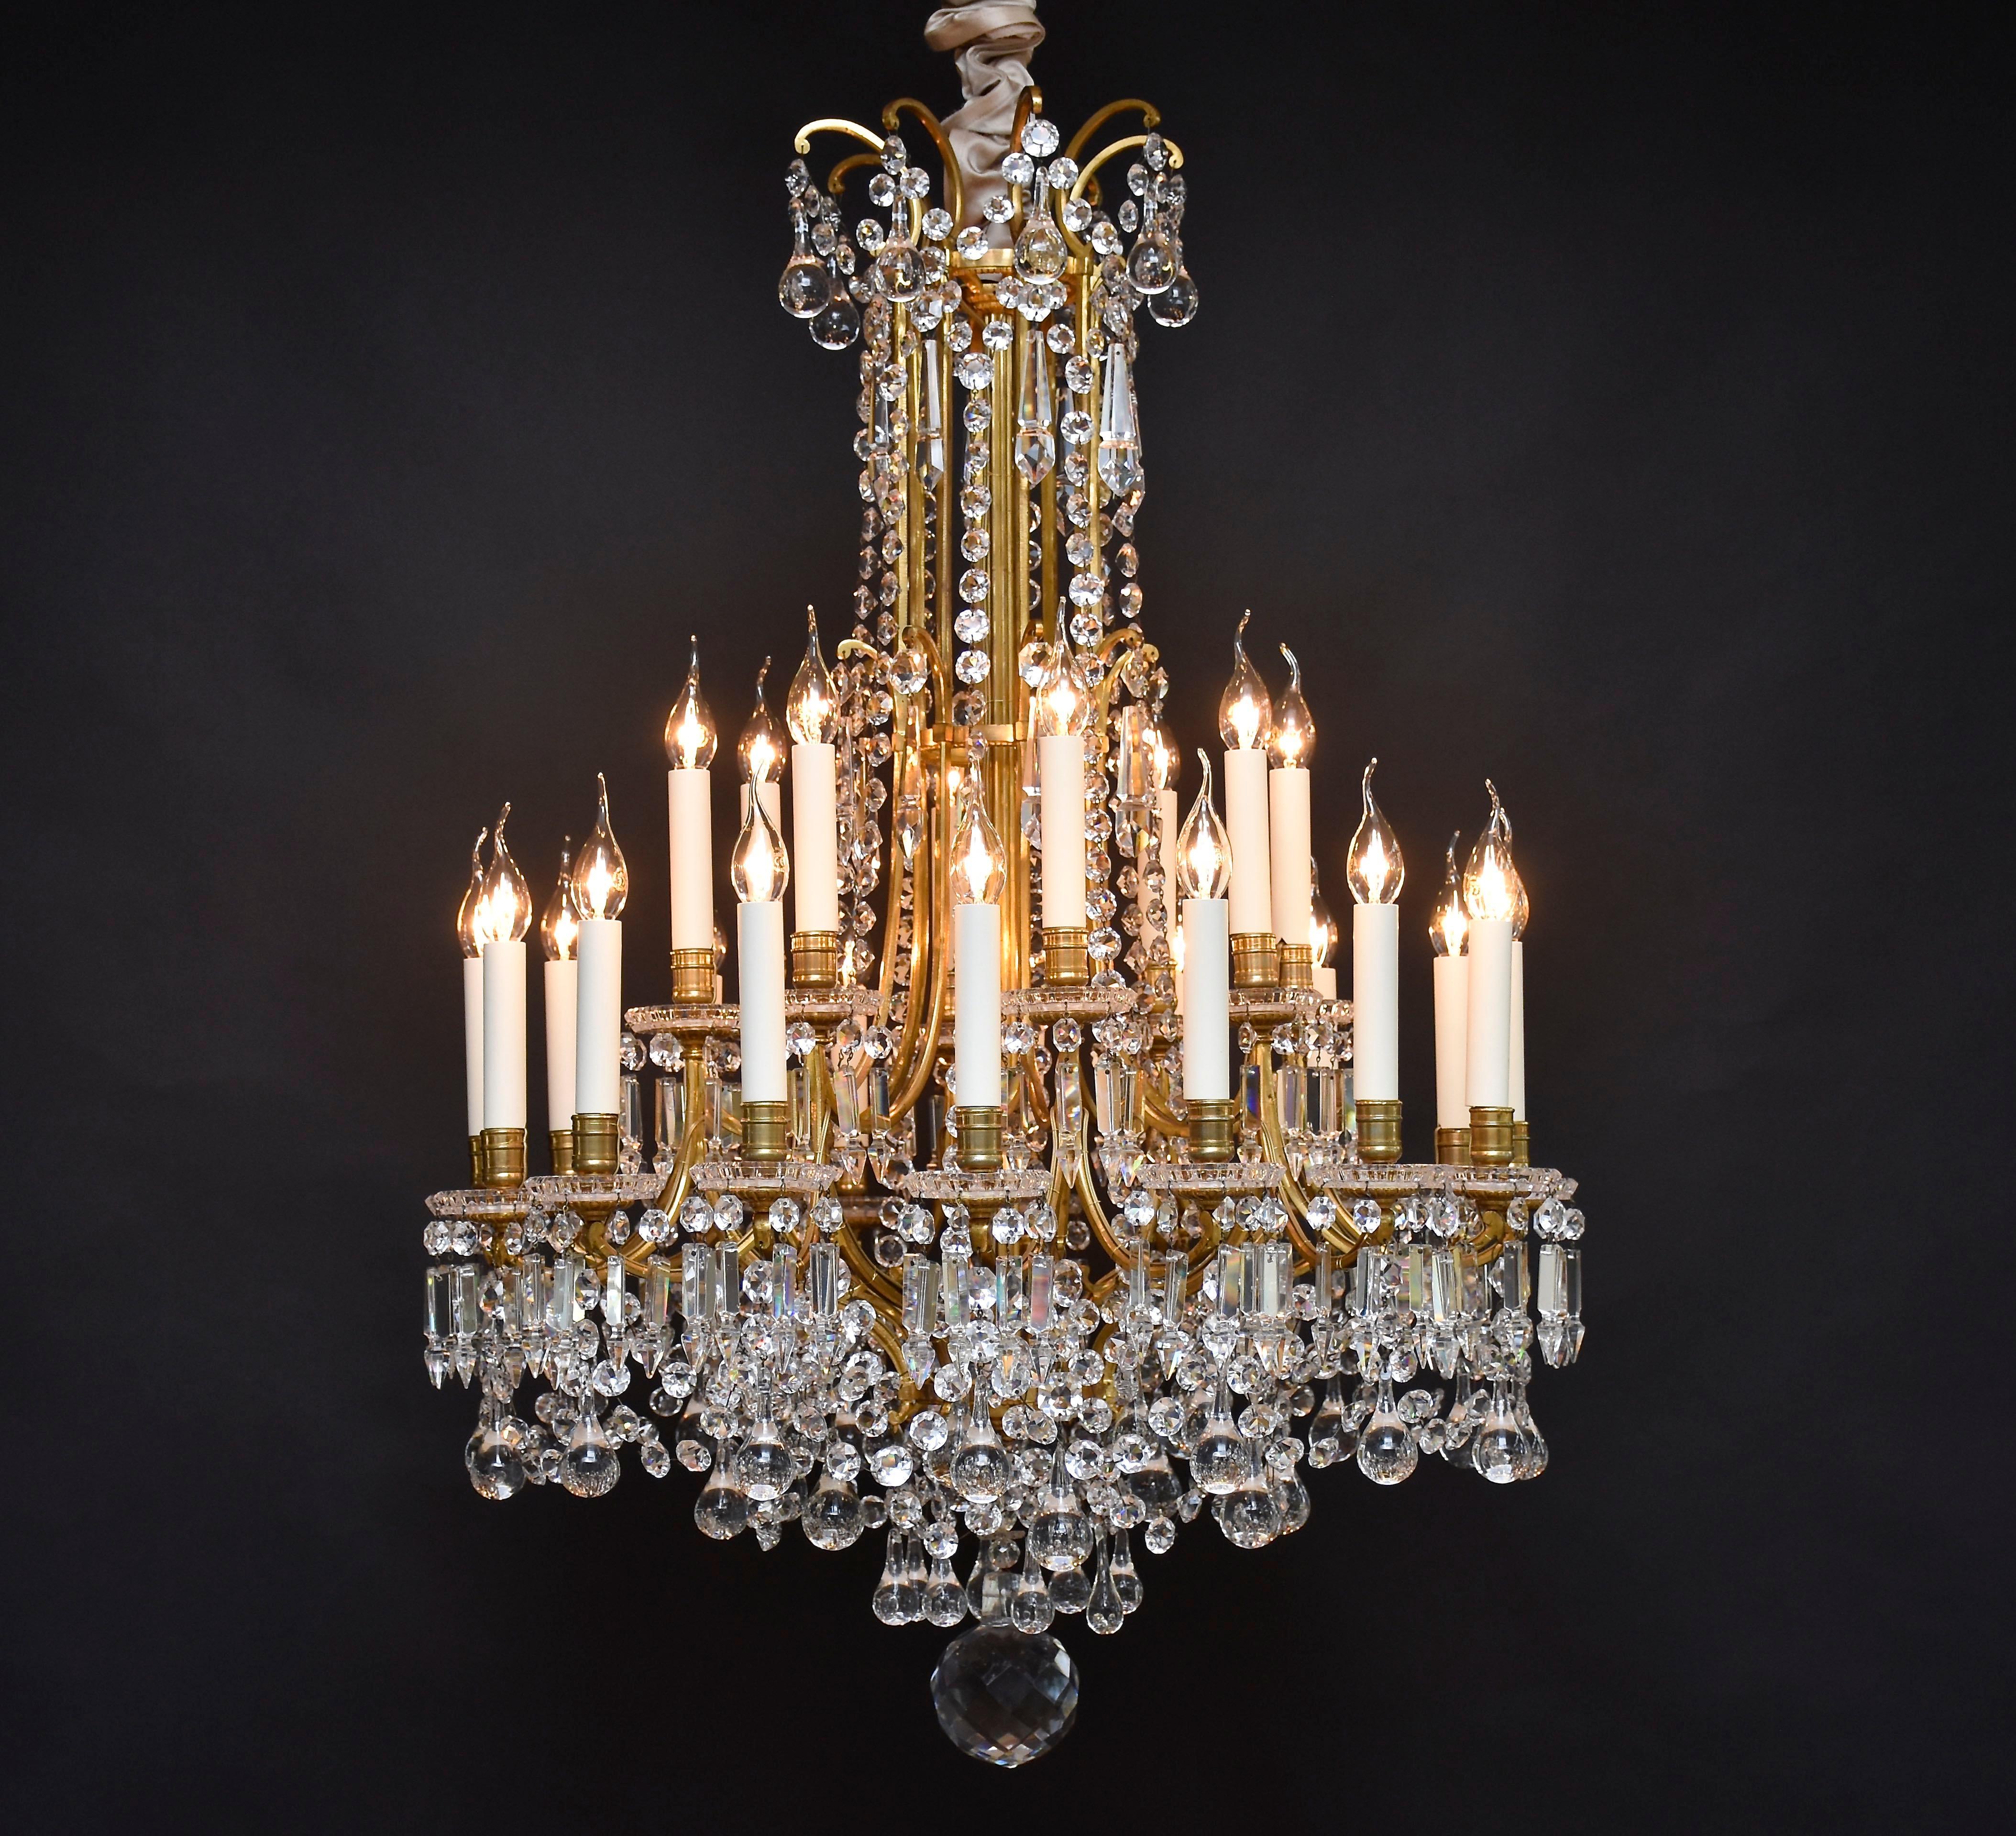 An outstanding large gilt bronze Baccarat chandelier with 24 lights from the prestigious and famous French crystal manufacturer- Baccarat. 
Richly decorated with delightful string of cut octagons and drops that capture beautifully the light.
Place